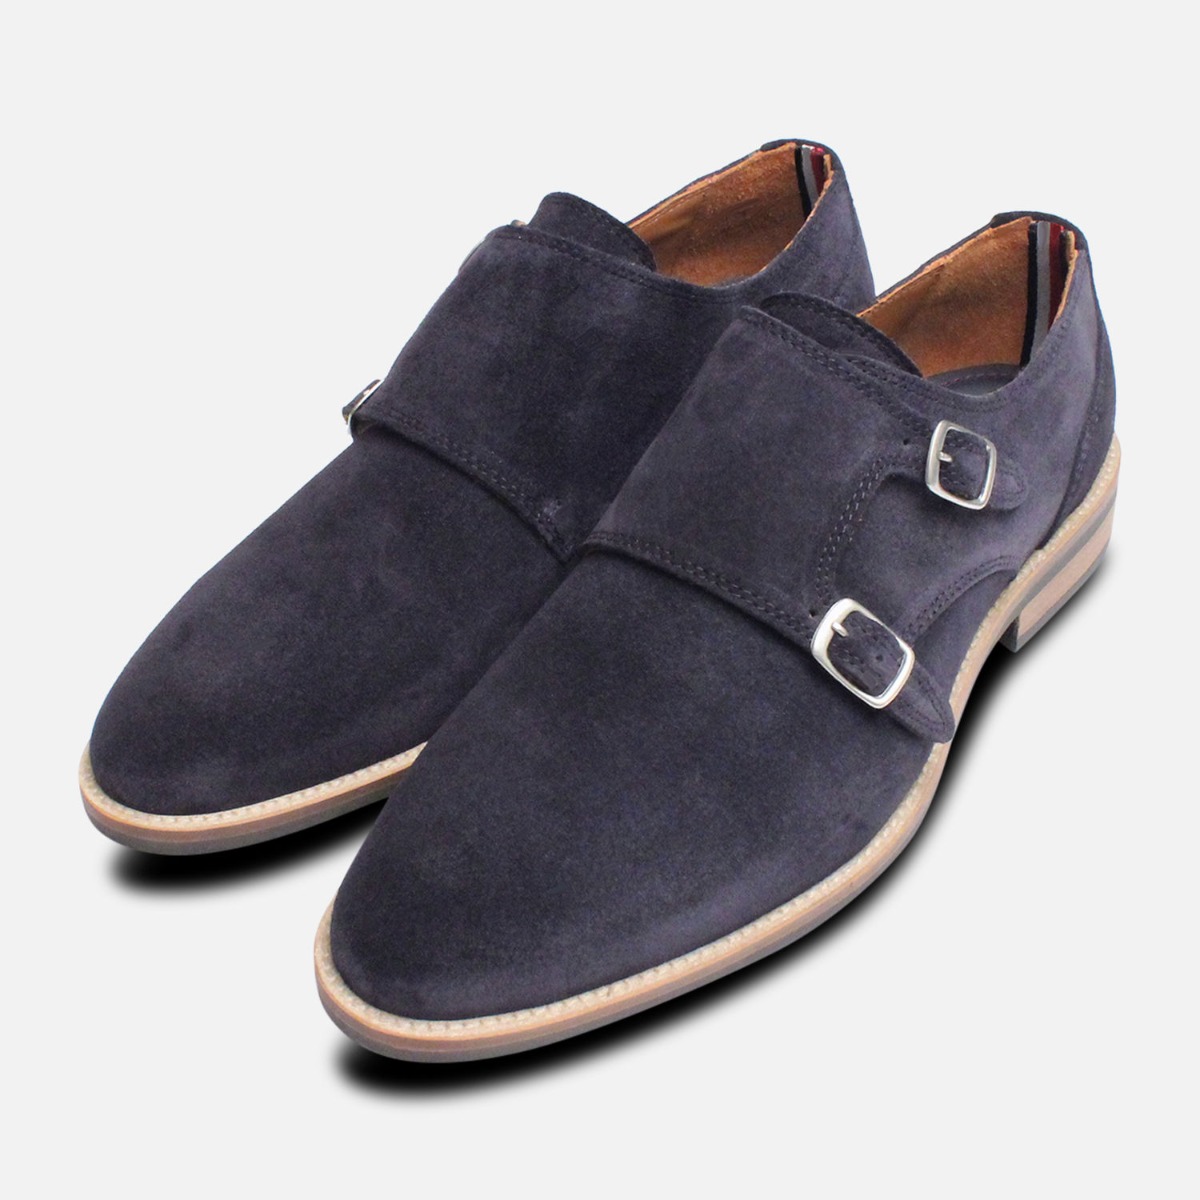 Monk Strap Tommy Hilfiger Shoes in Navy 